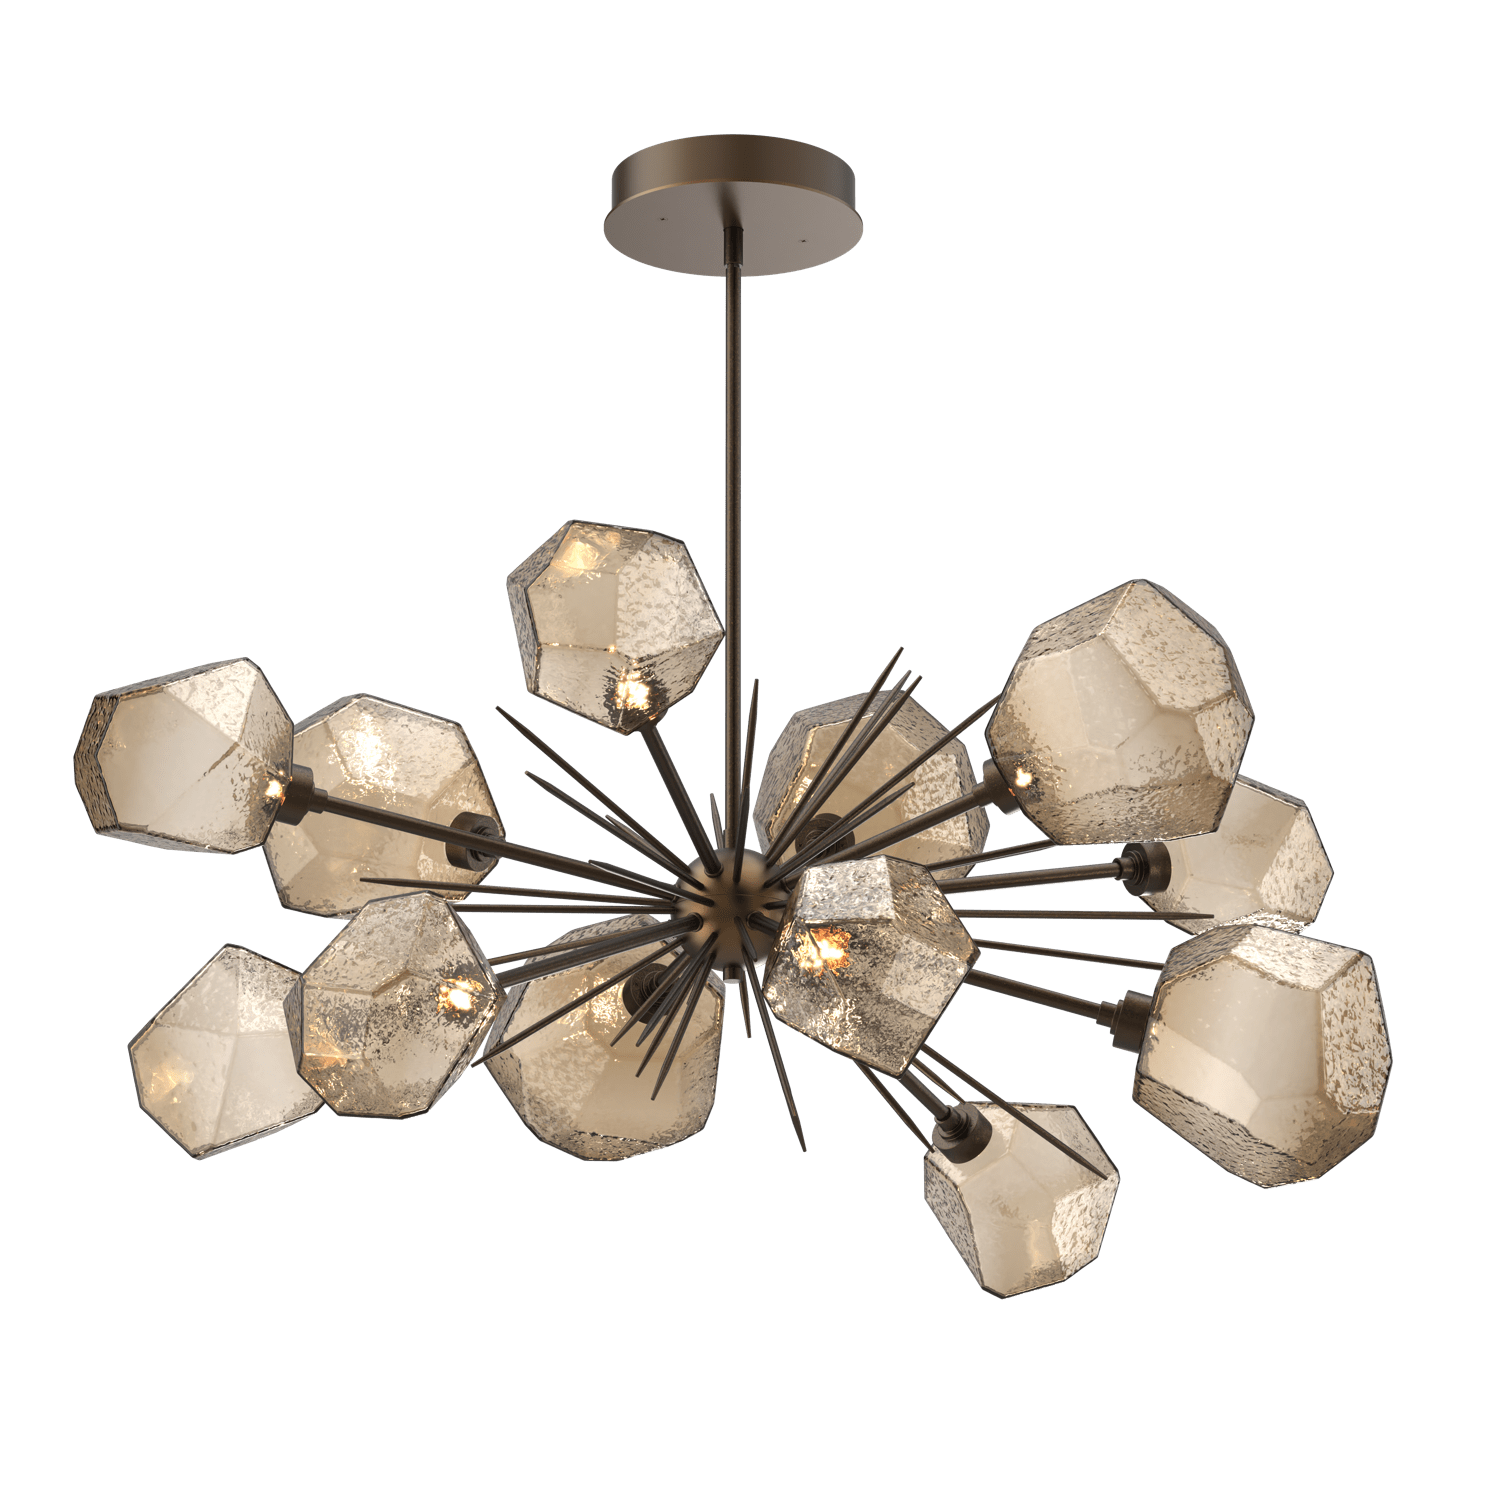 PLB0039-0D-FB-B-Hammerton-Studio-Gem-43-inch-oval-starburst-chandelier-with-flat-bronze-finish-and-bronze-blown-glass-shades-and-LED-lamping